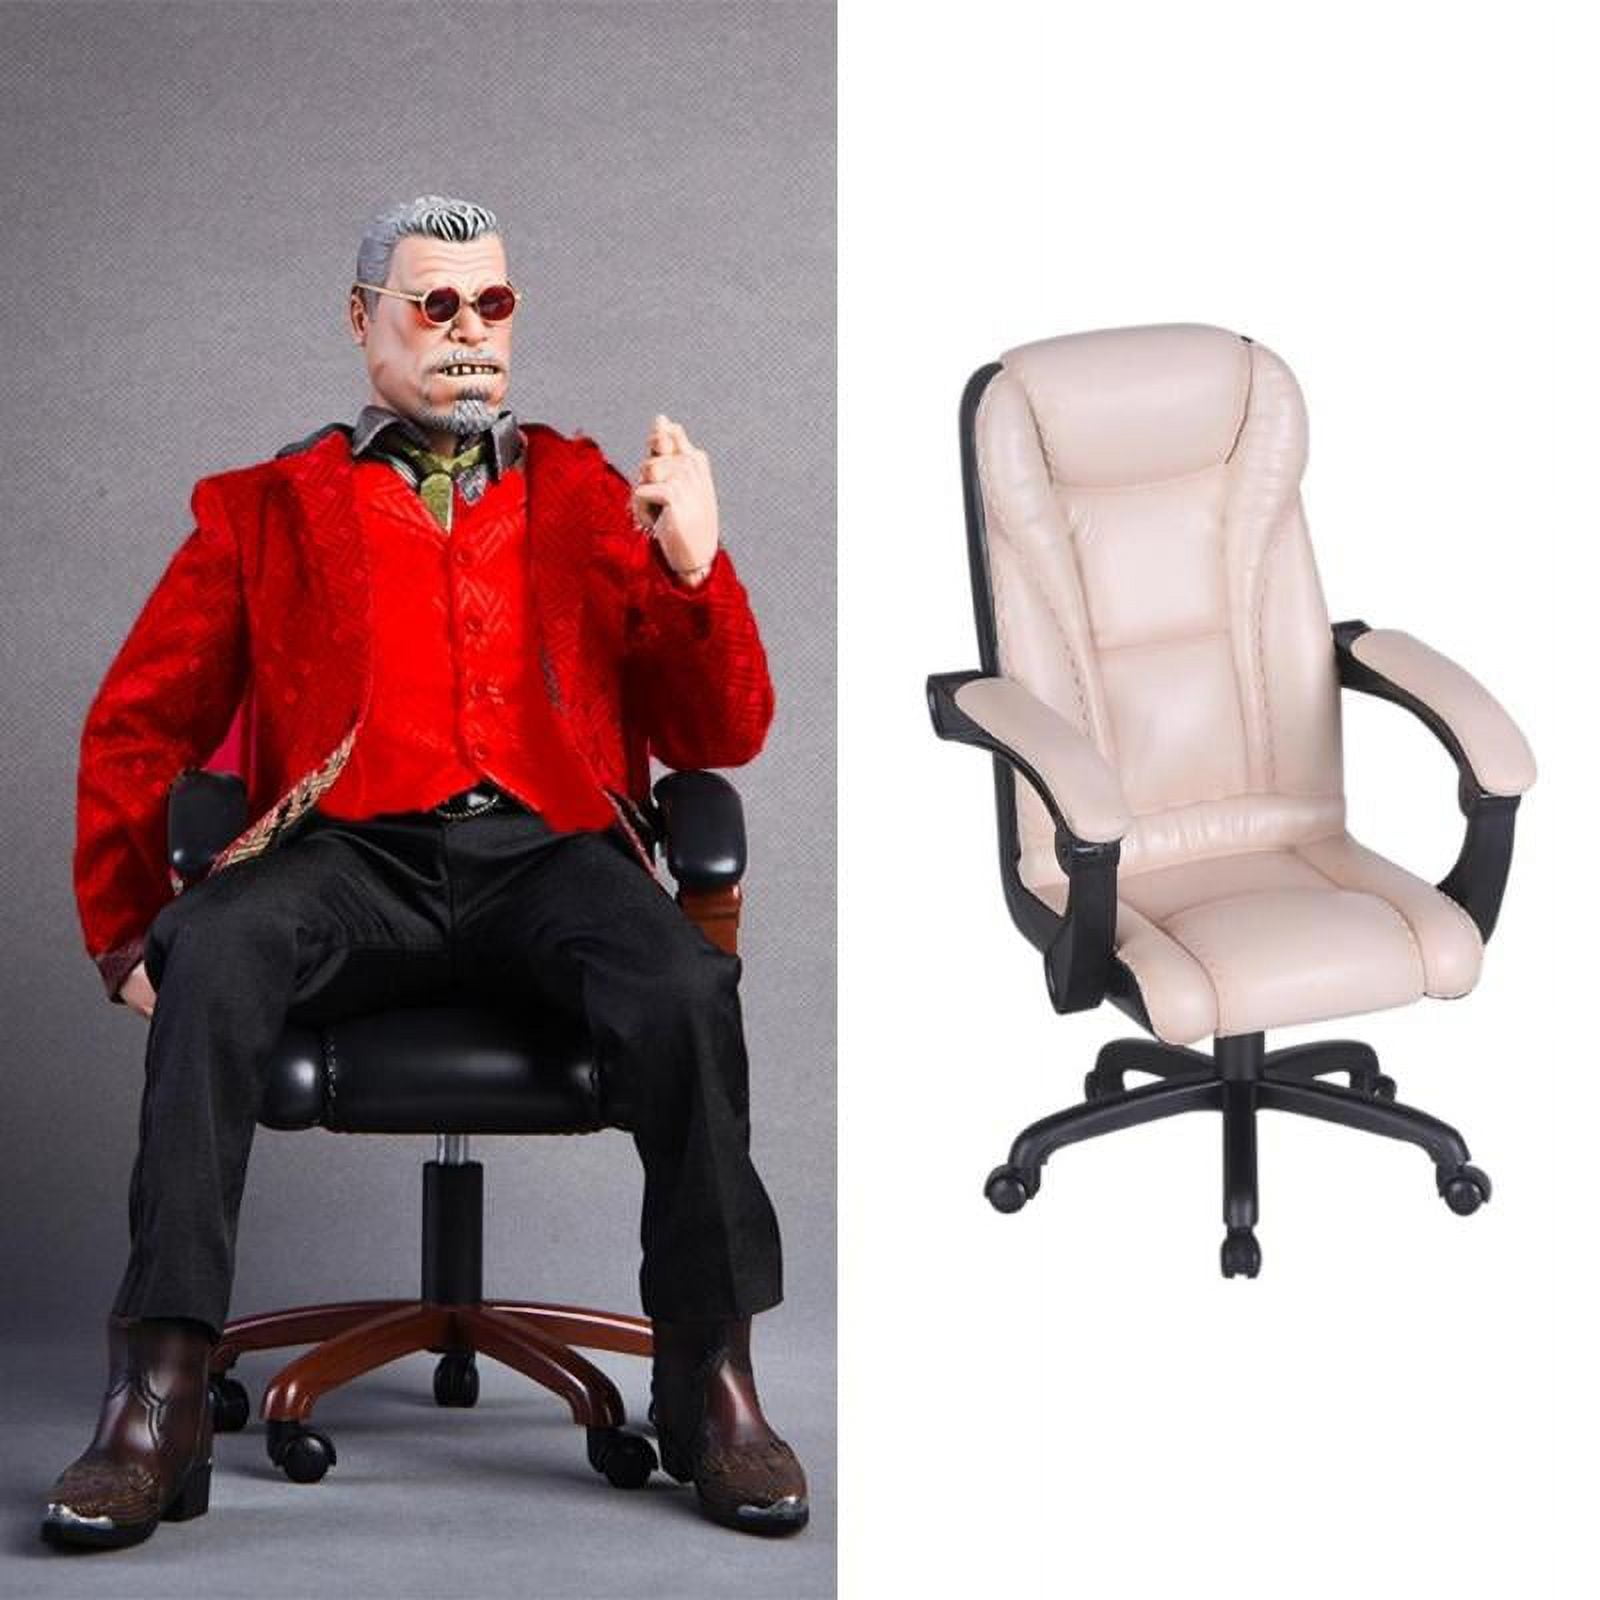 1/6 Scale Swivel Chair Office Desk Chairs Action Figure Toy Accessories Red